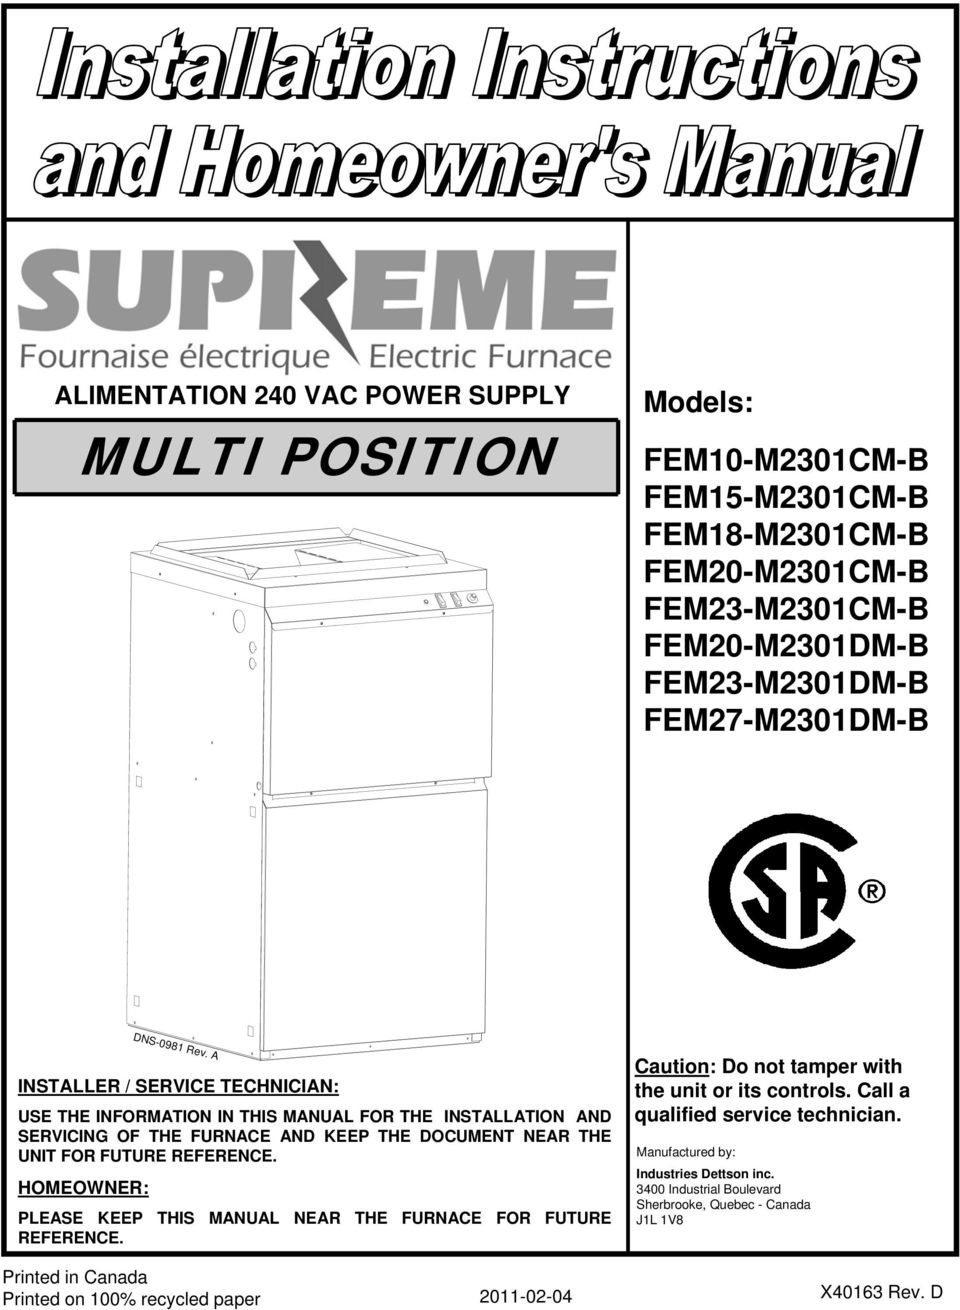 A INSTALLER / SERVICE TECHNICIAN: USE THE INFORMATION IN THIS MANUAL FOR THE INSTALLATION AND SERVICING OF THE FURNACE AND KEEP THE DOCUMENT NEAR THE UNIT FOR FUTURE REFERENCE.